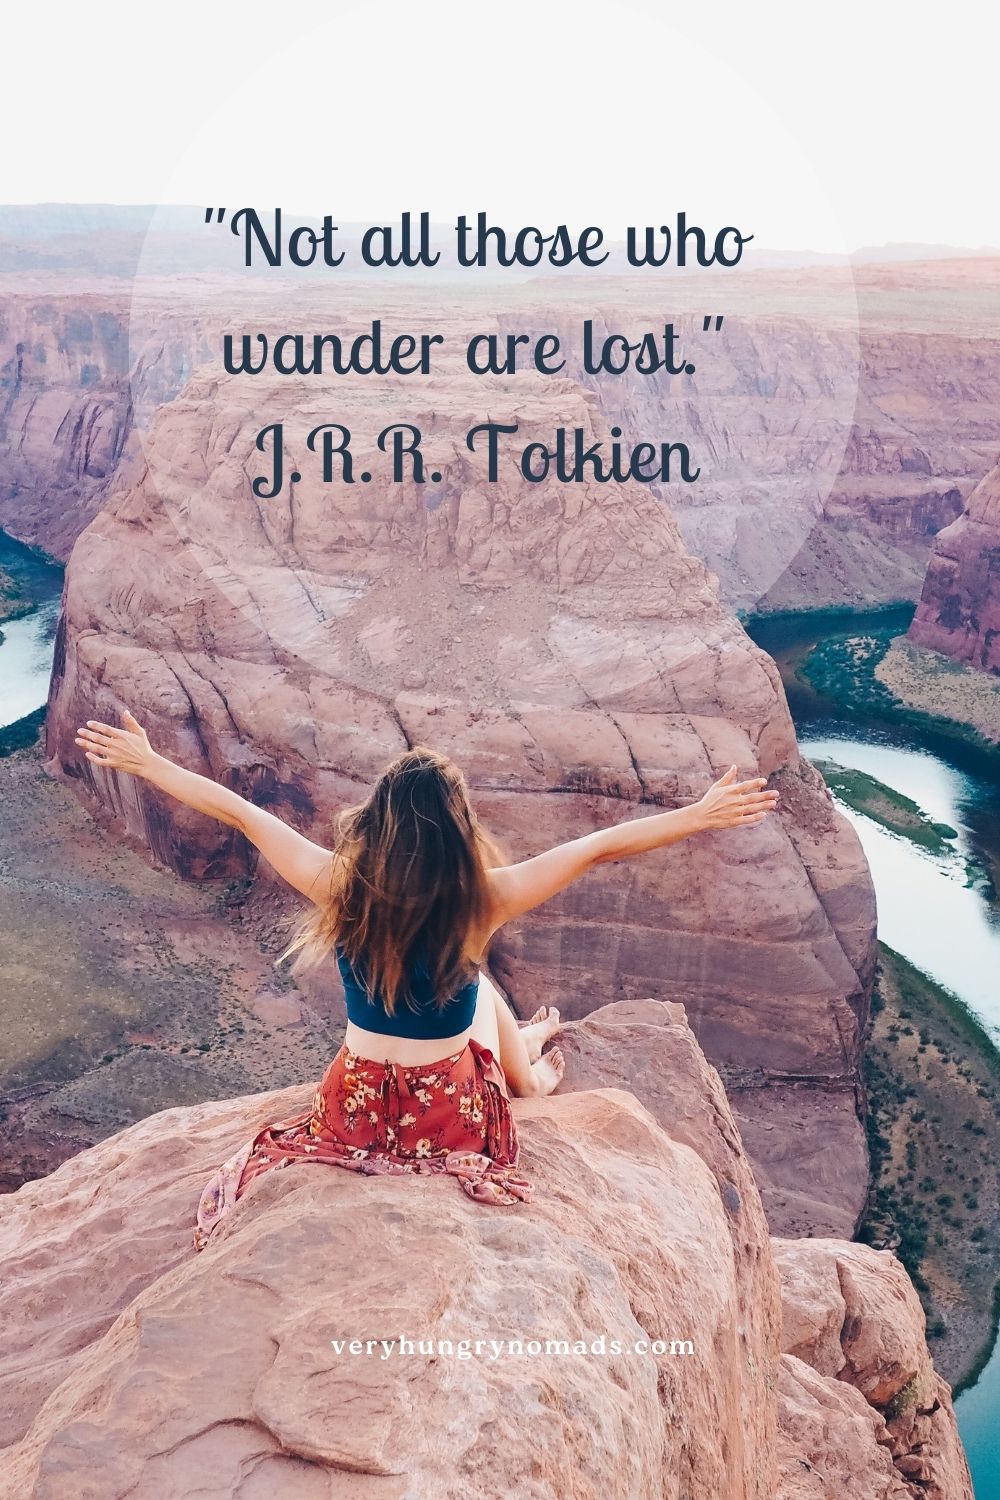 Quotes about Adventure - Not all those who wander are lost